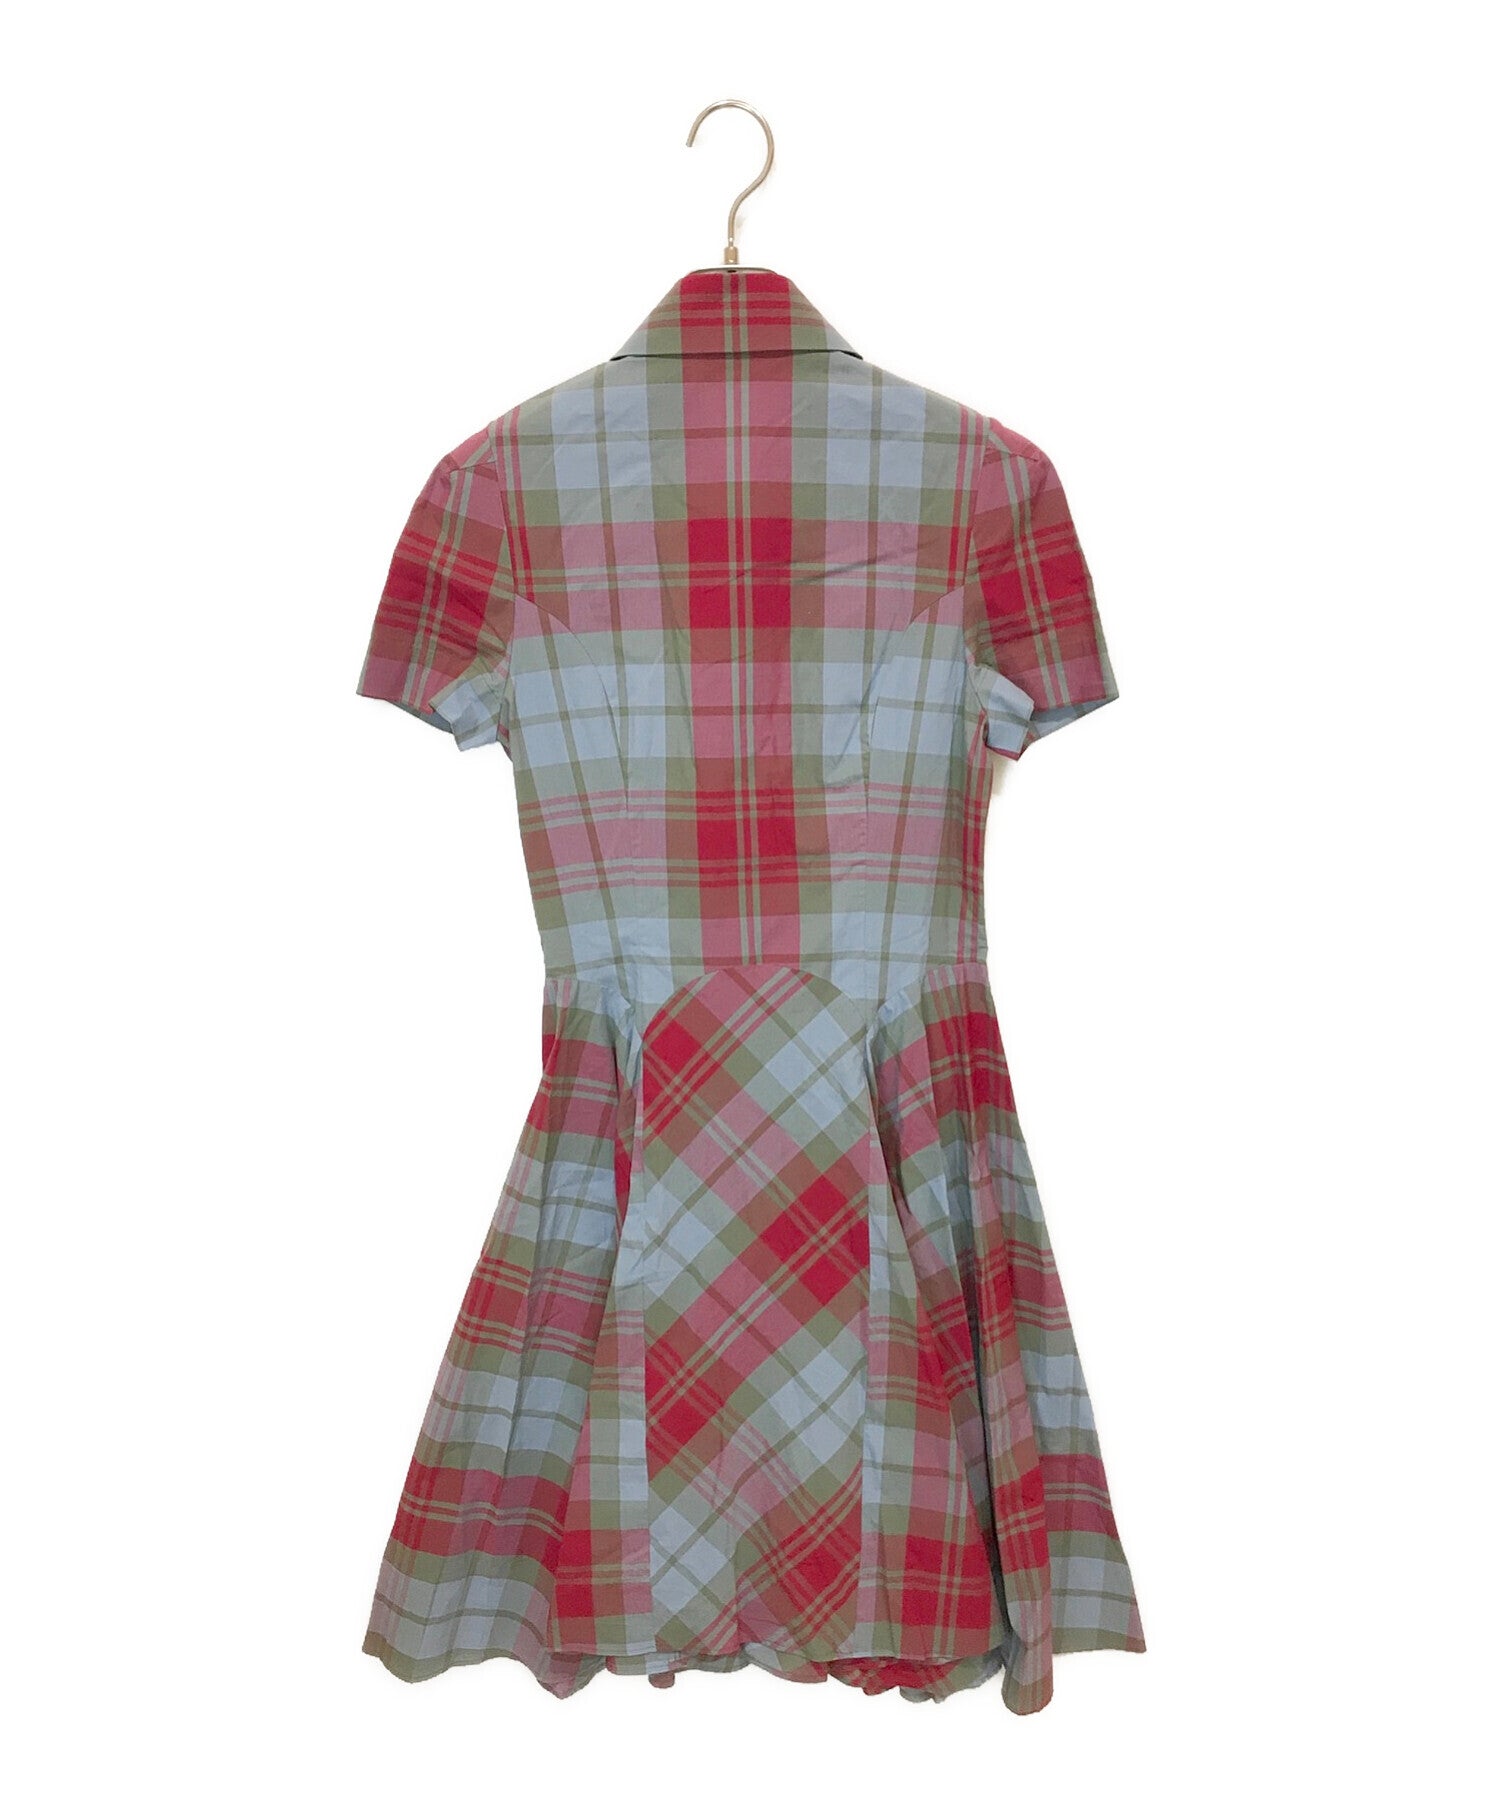 Vivienne Westwood RED LABEL Check Dress 16-01-581021 | Archive Factory